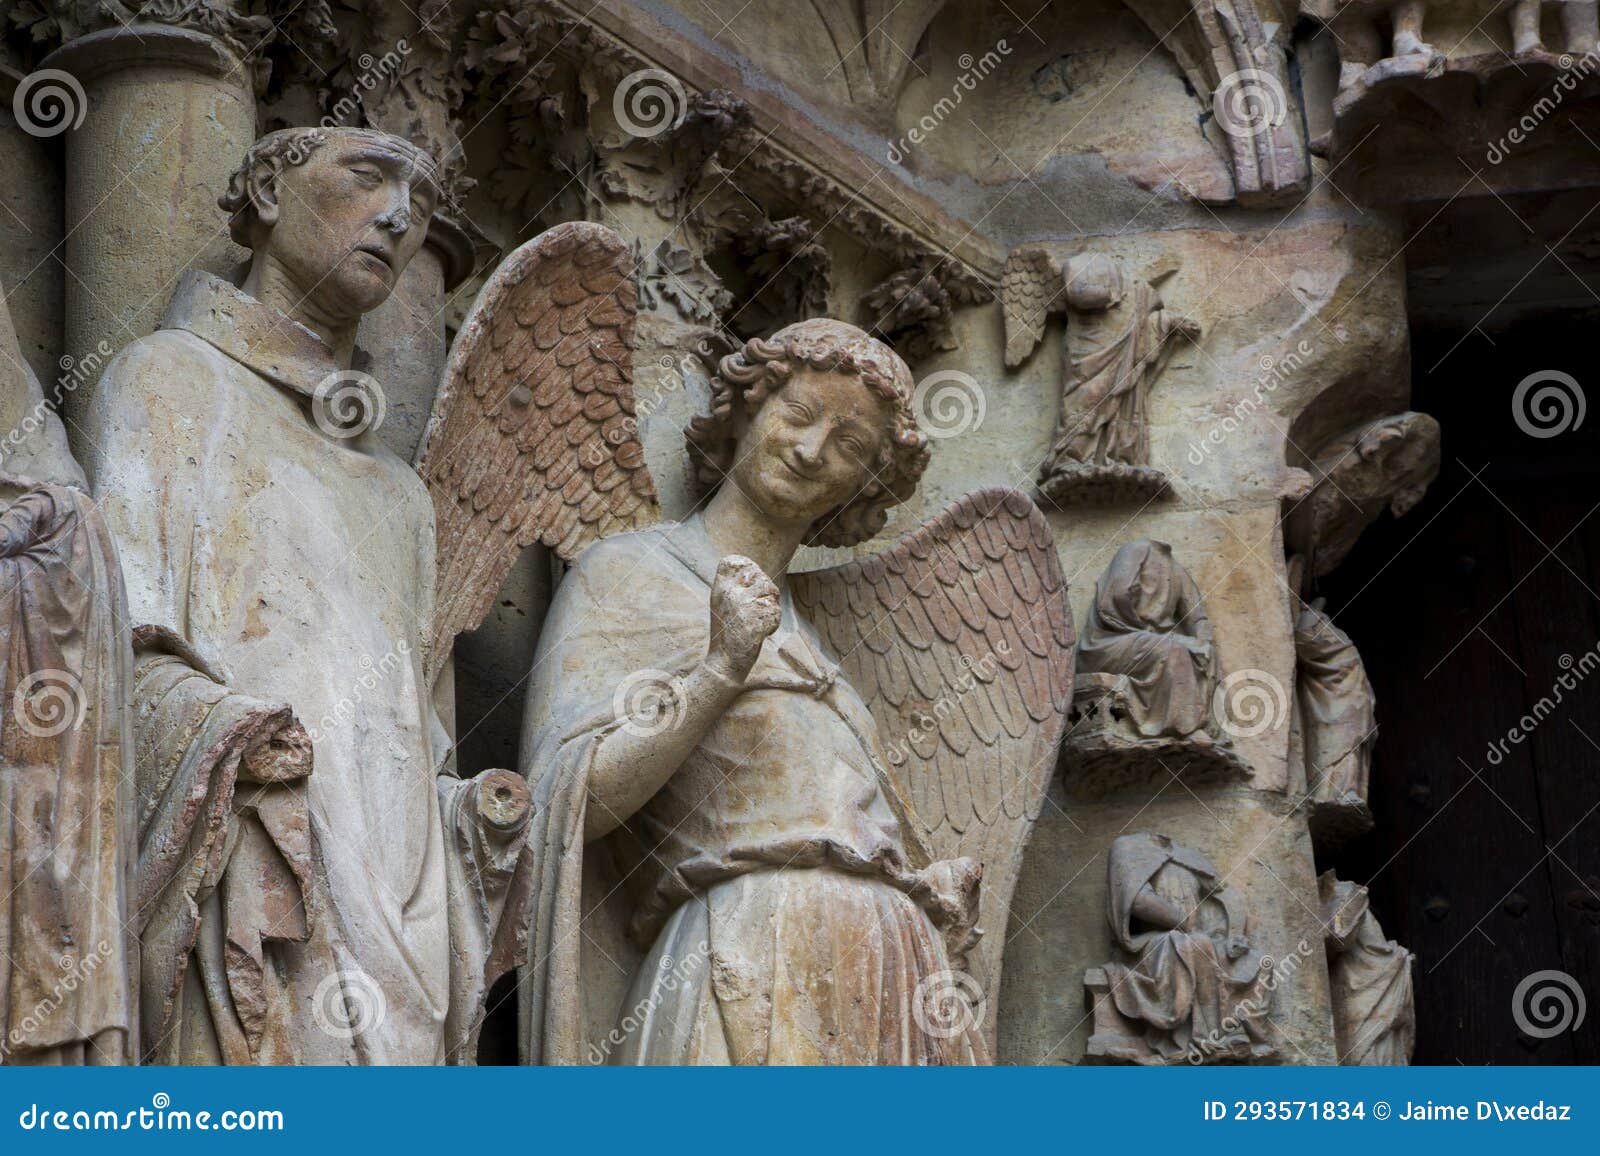 the angel of smile, reims cathedral, france